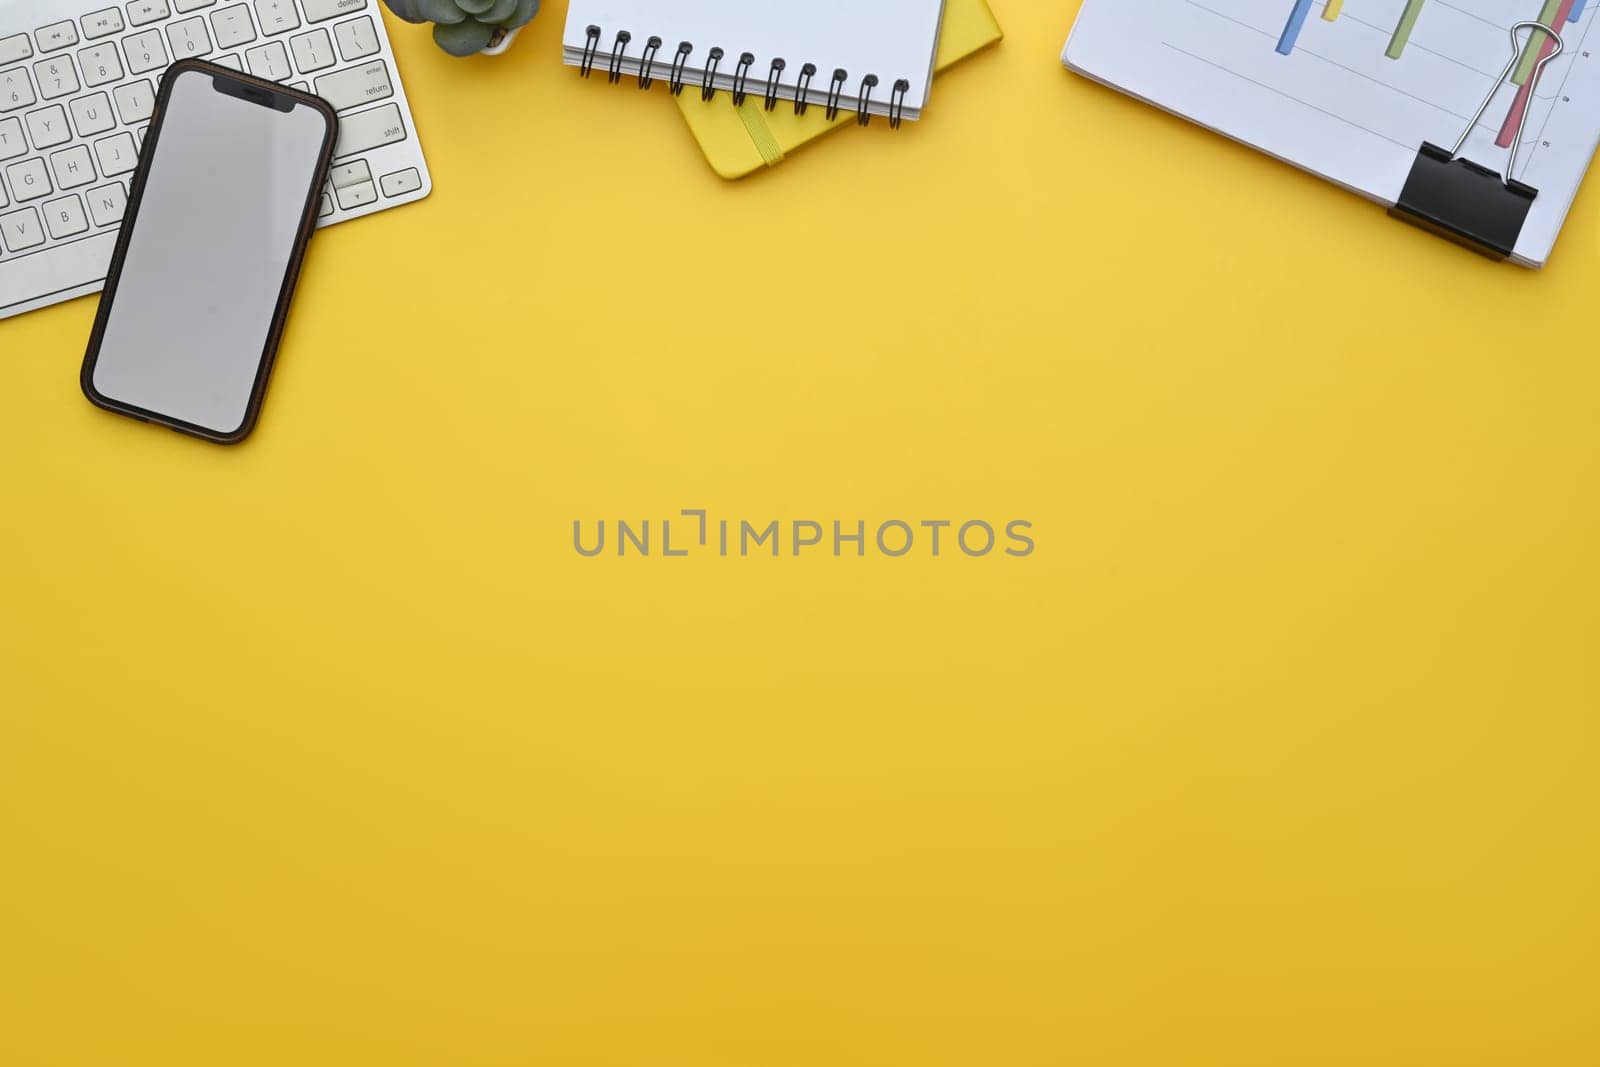 Smartphone, keyboard, notepad and financial documents on yellow background.